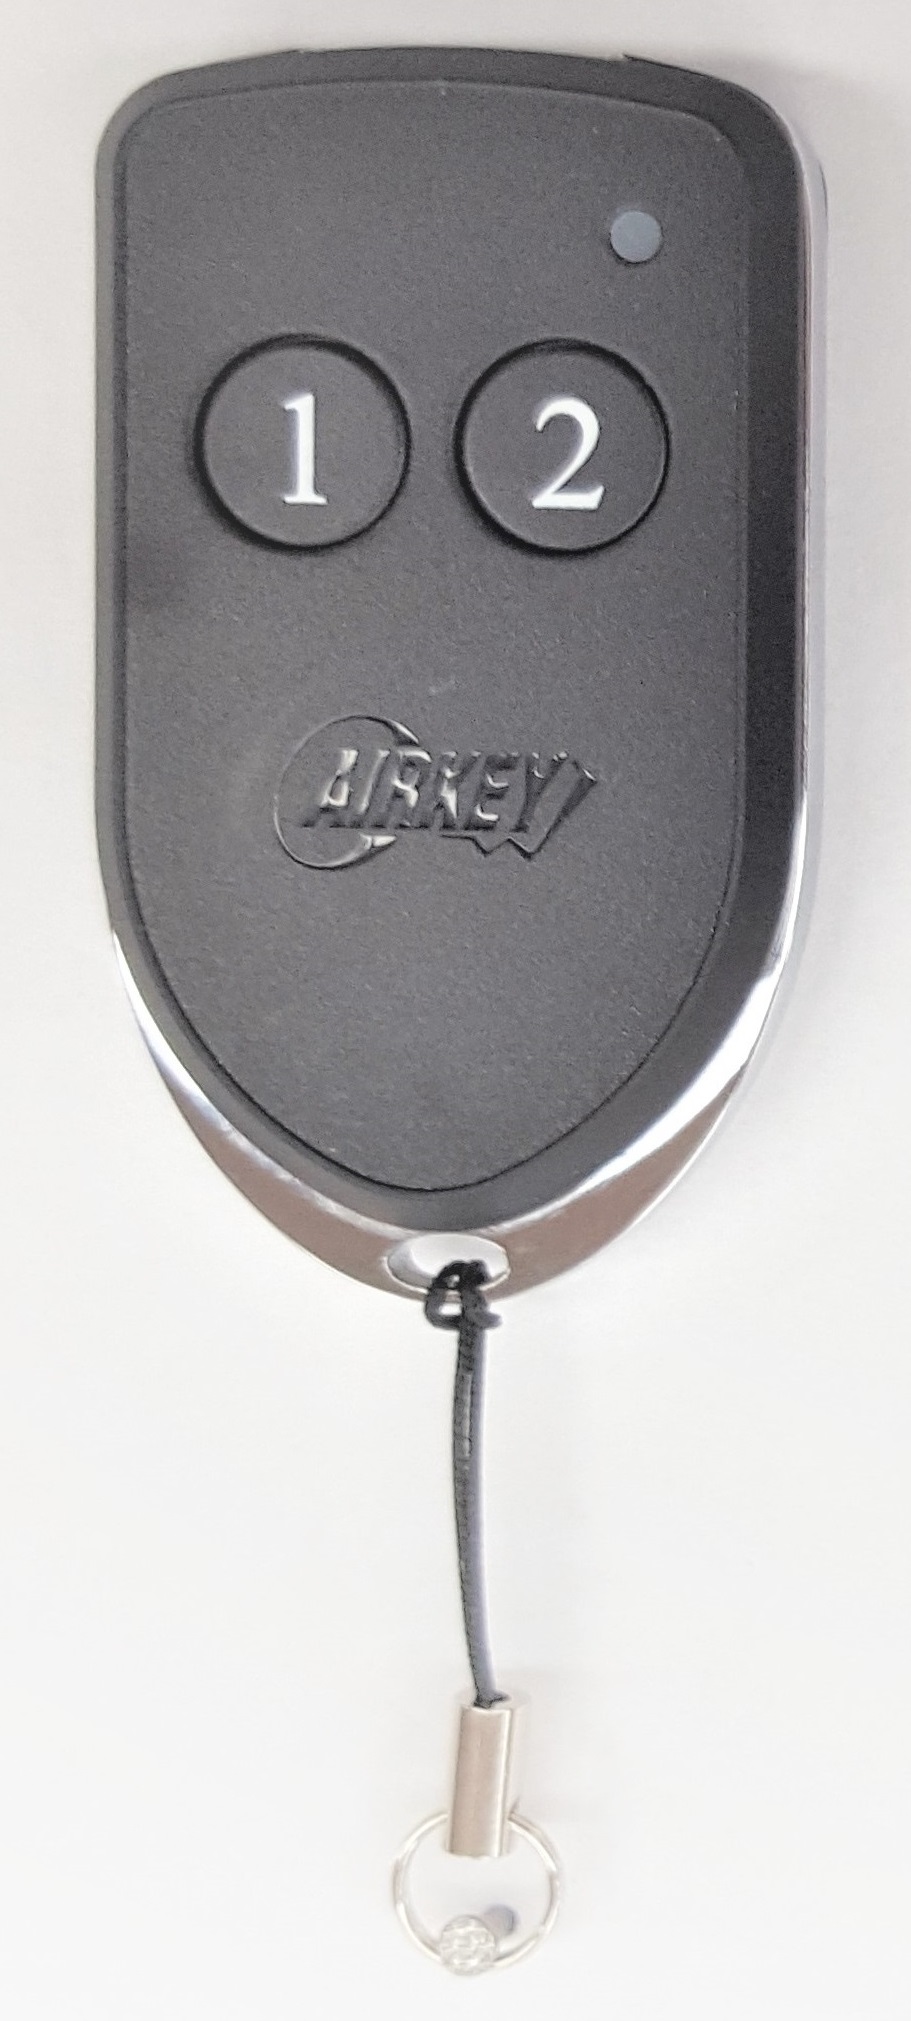 AIRKEY SERIES-4, 2 BUTTON REMOTE 26-BIT WIEGAND TRANSMITTER 433.92MHz IP65 BLACK WITH SILVER TRIM WITH BLACK KEYS 1/2 ROLLING CODE ENCRYPTION